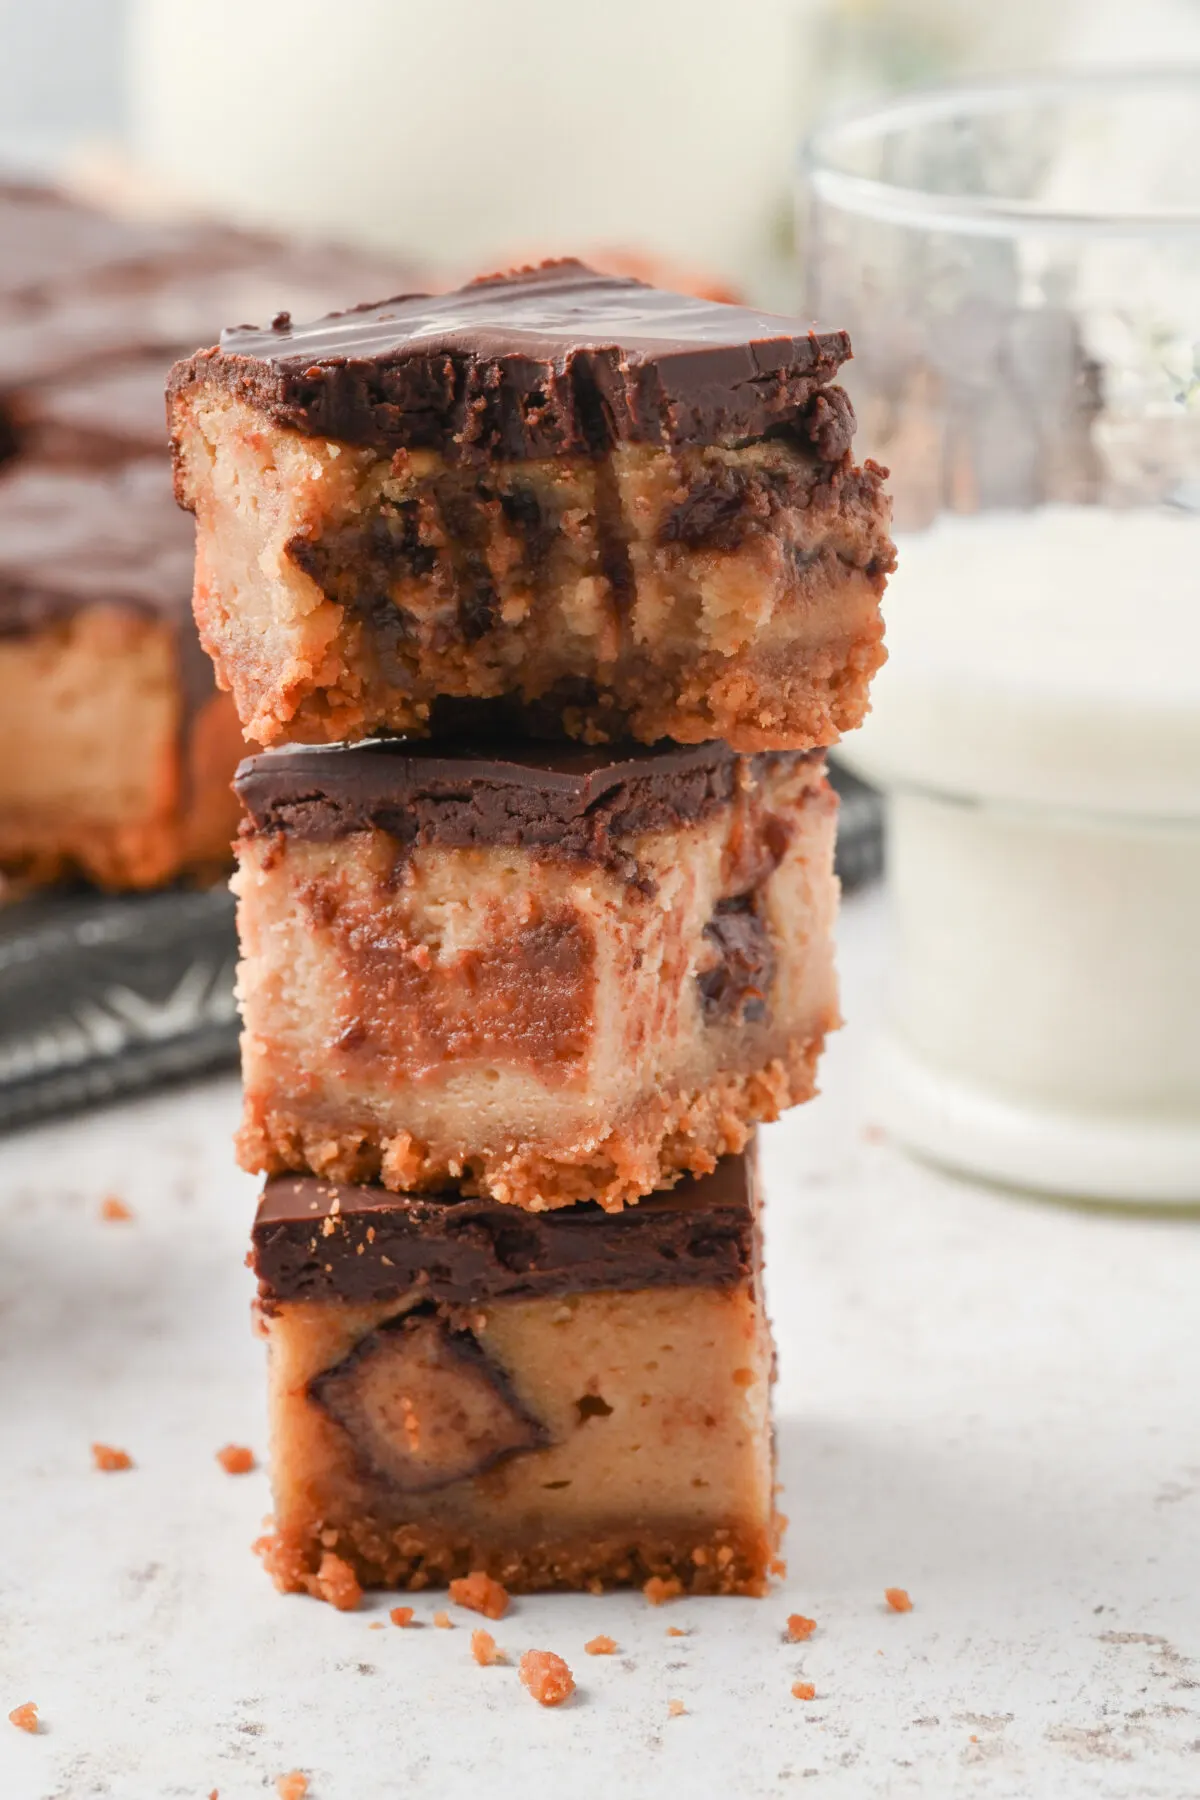 Peanut butter cheesecake bars recipe featuring a nutter butter crust, creamy cheesecake layer, topped off with a silky chocolate ganache.